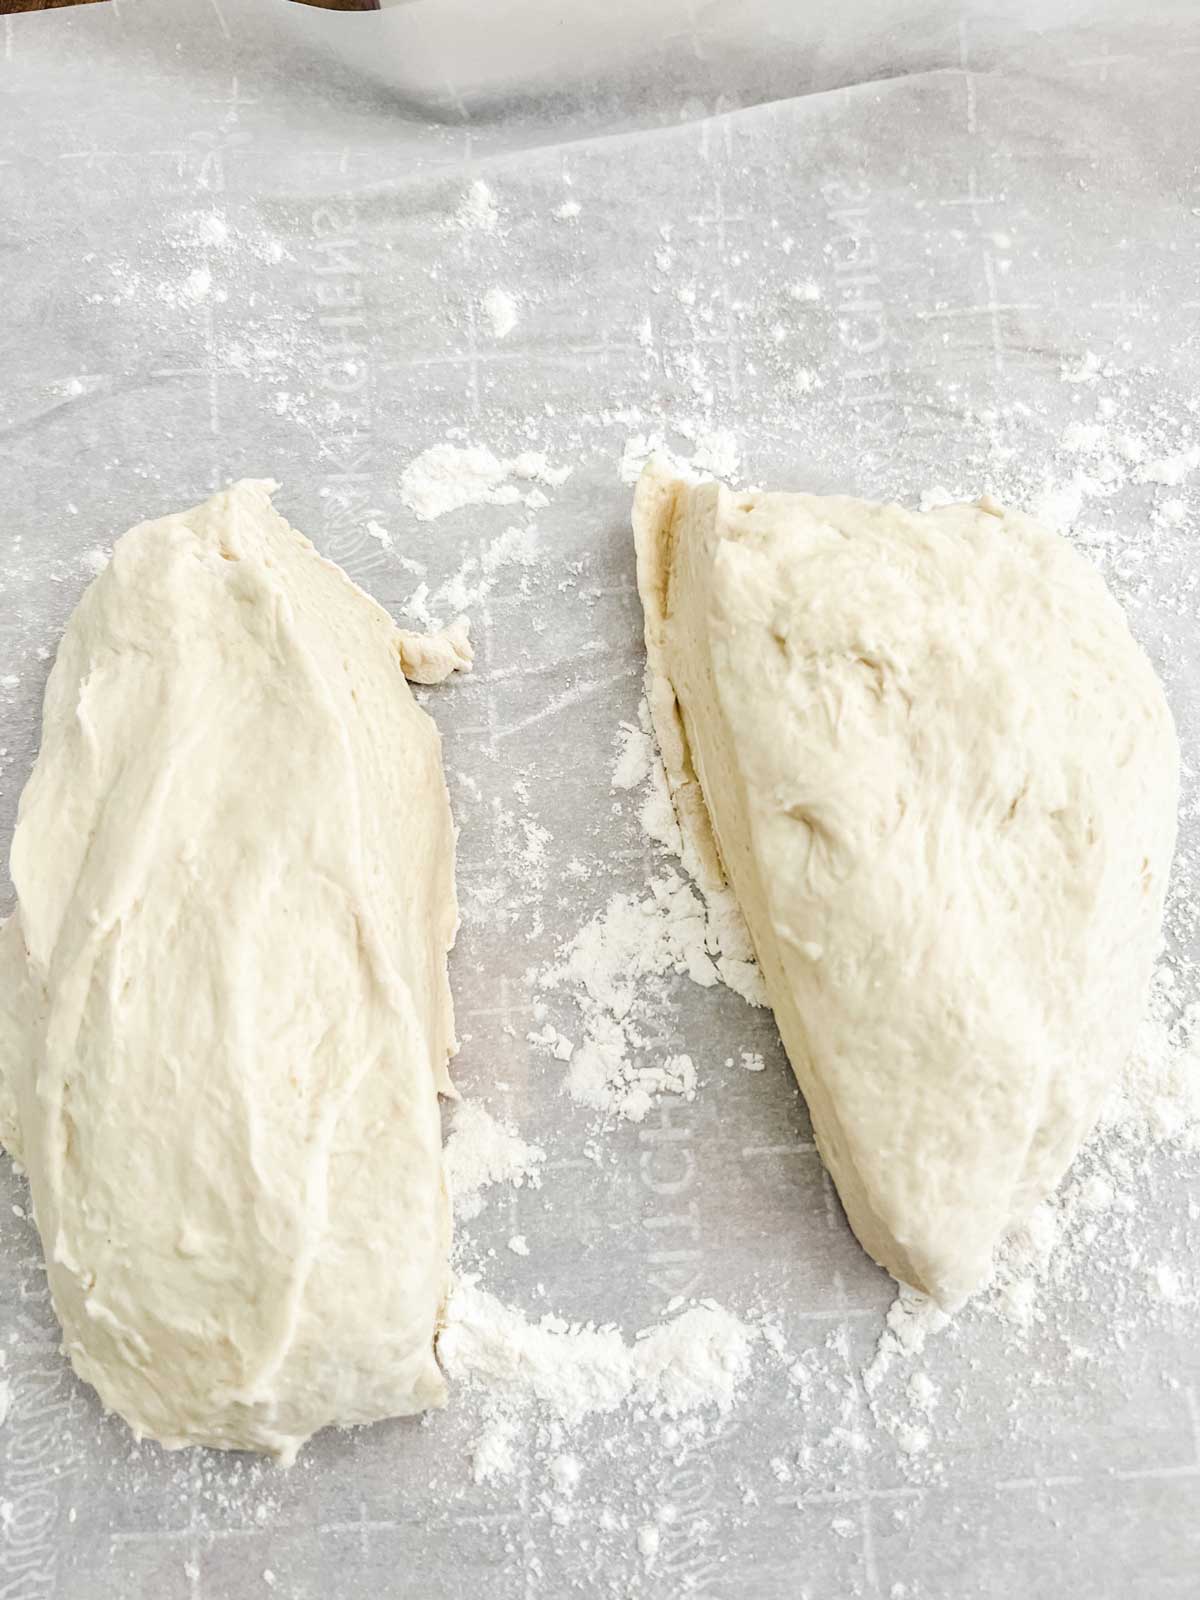 Pizza dough that has been cut in half on a flour lined piece of parchment paper.